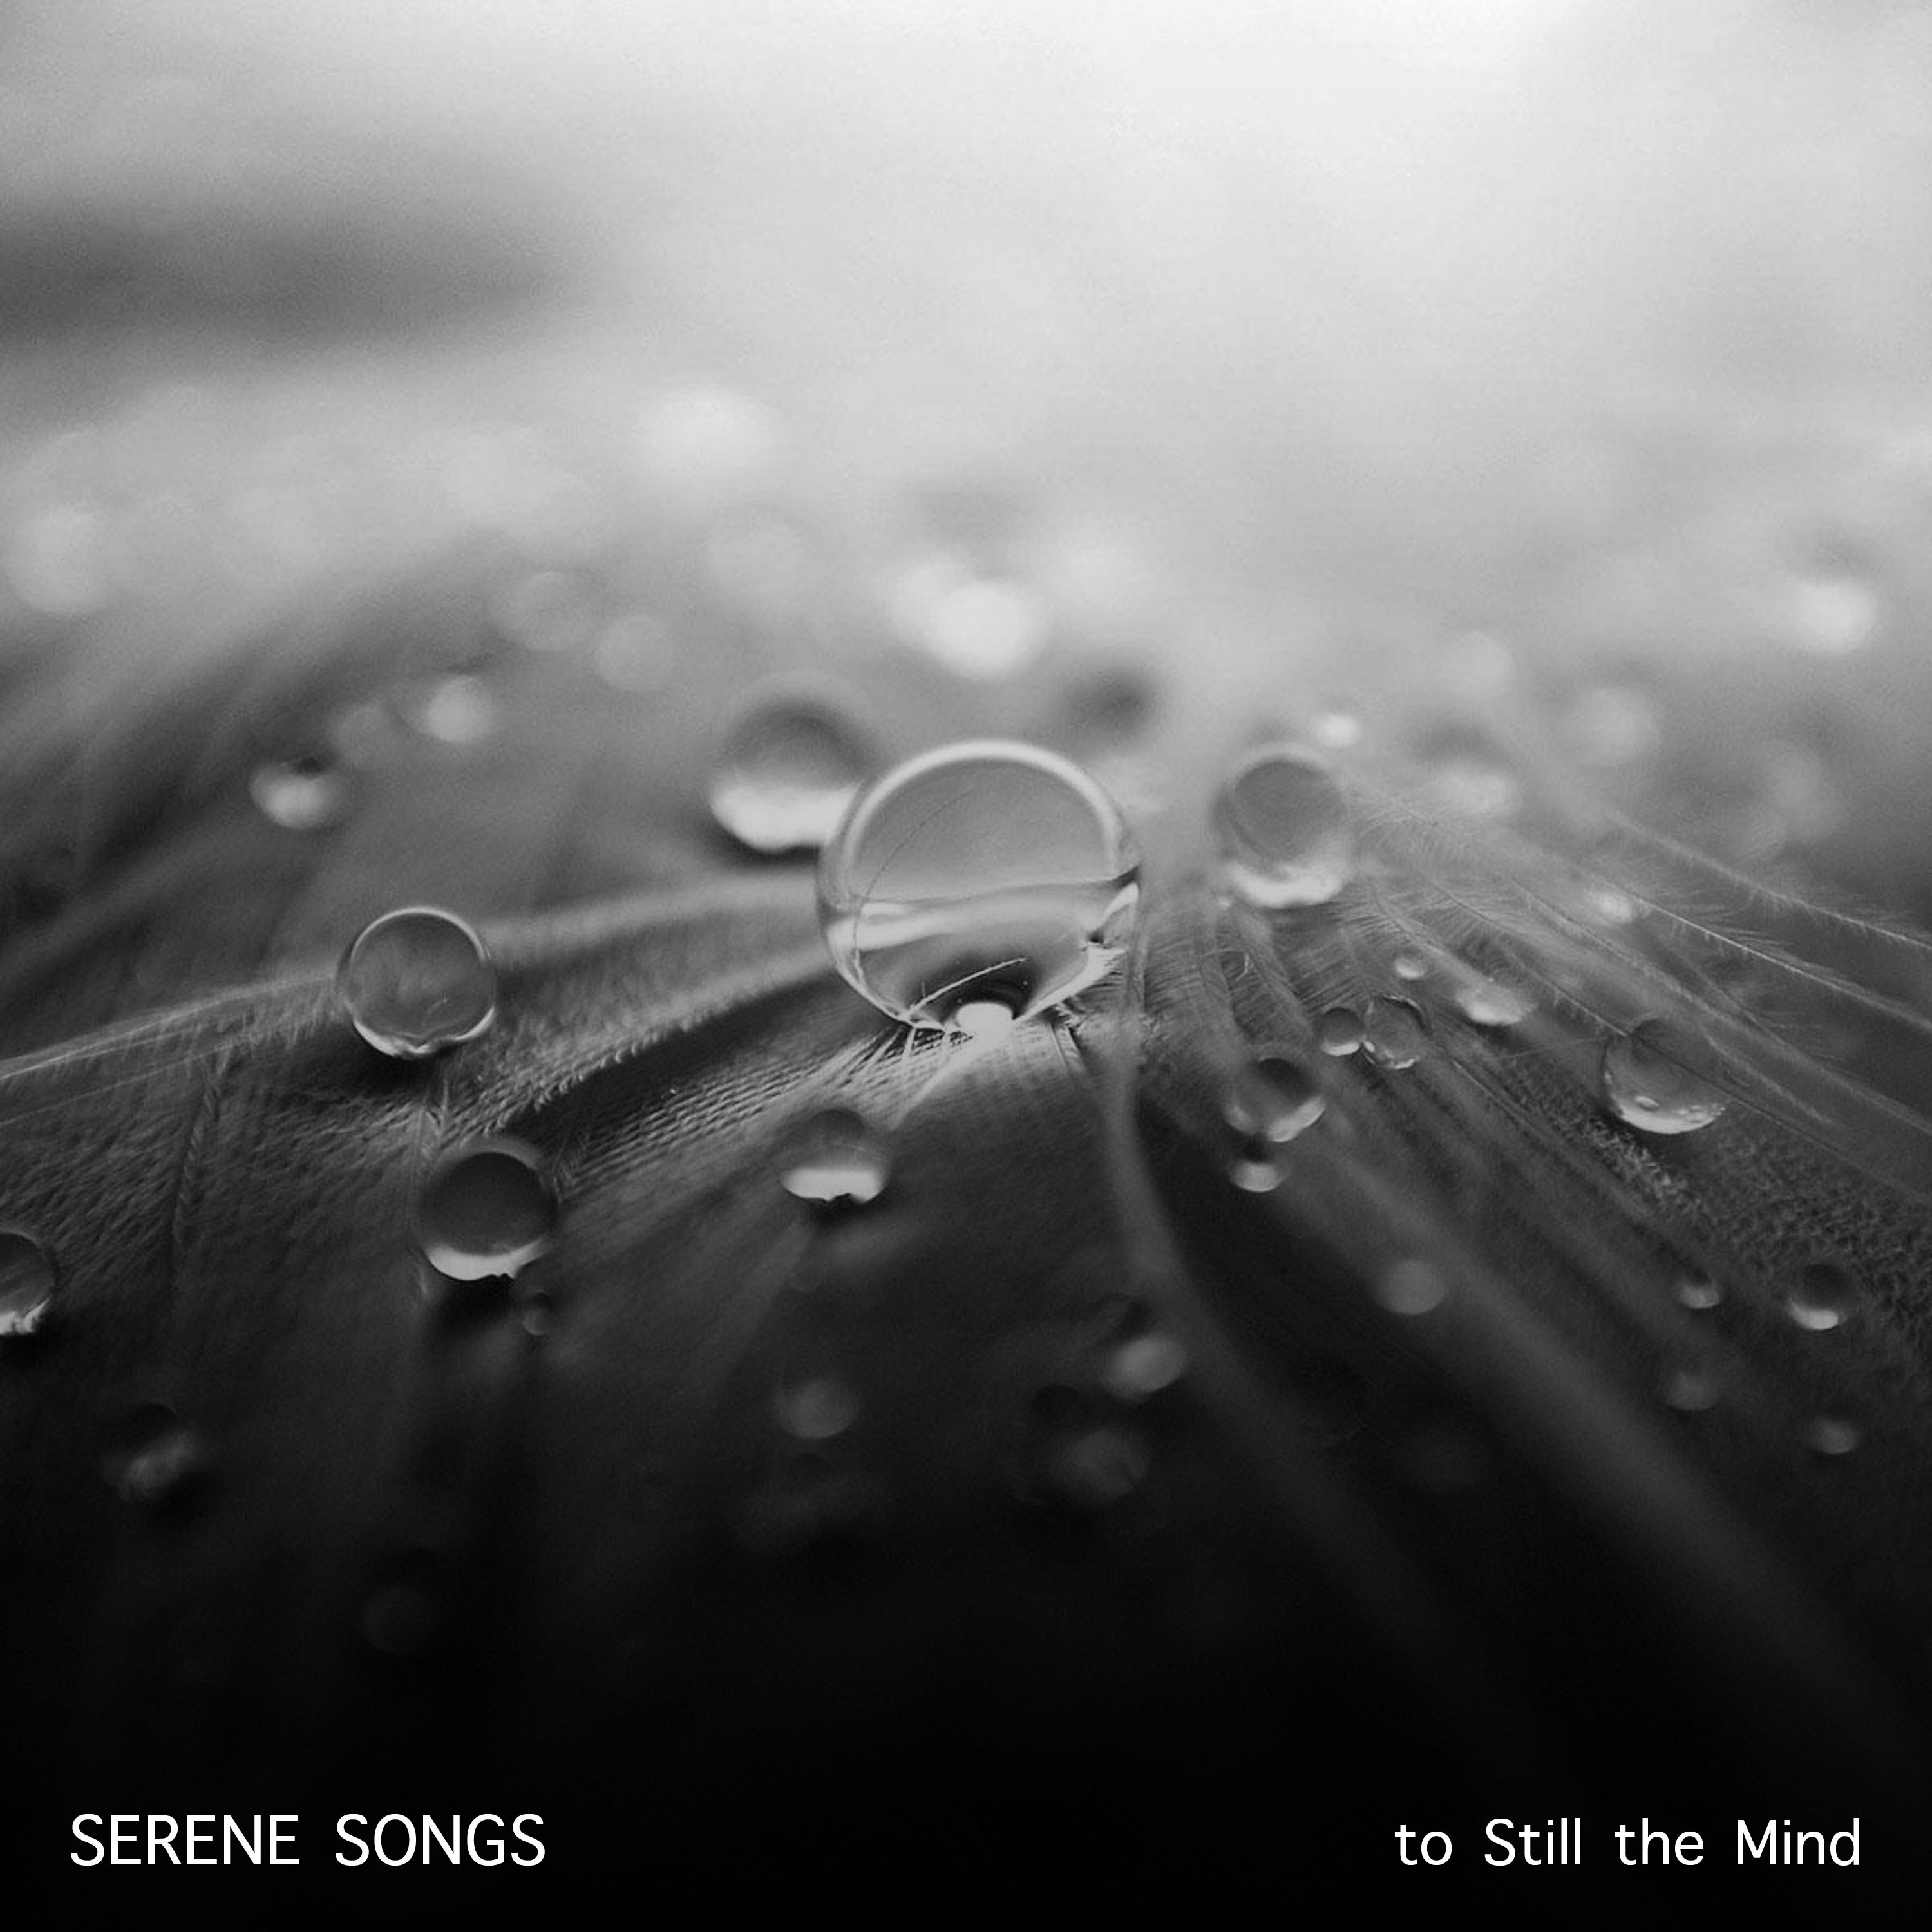 15 Serene Songs to Still the Mind